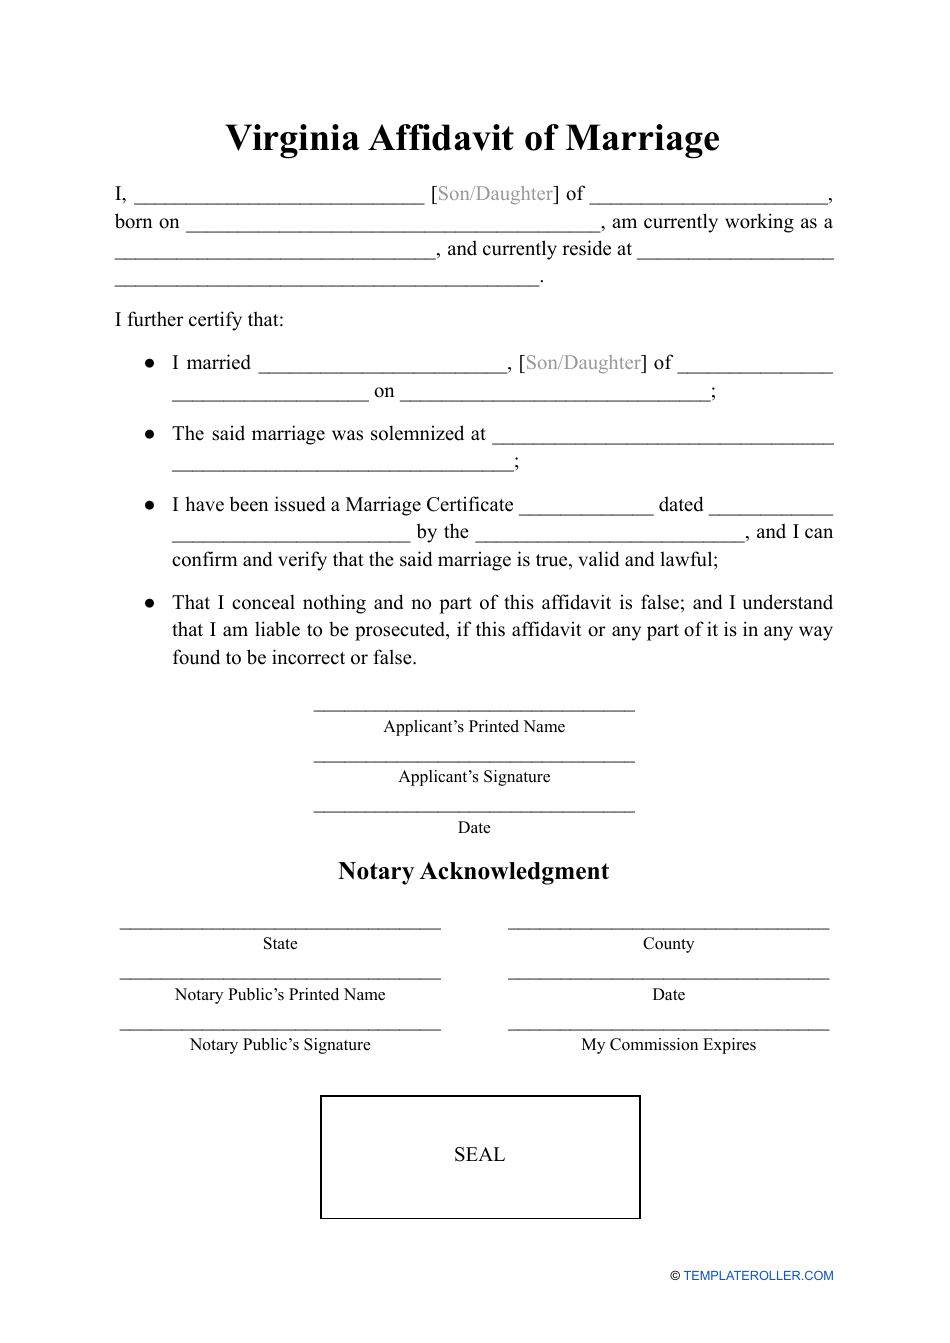 Virginia Affidavit Of Marriage Fill Out Sign Online And Download Pdf Templateroller 1850